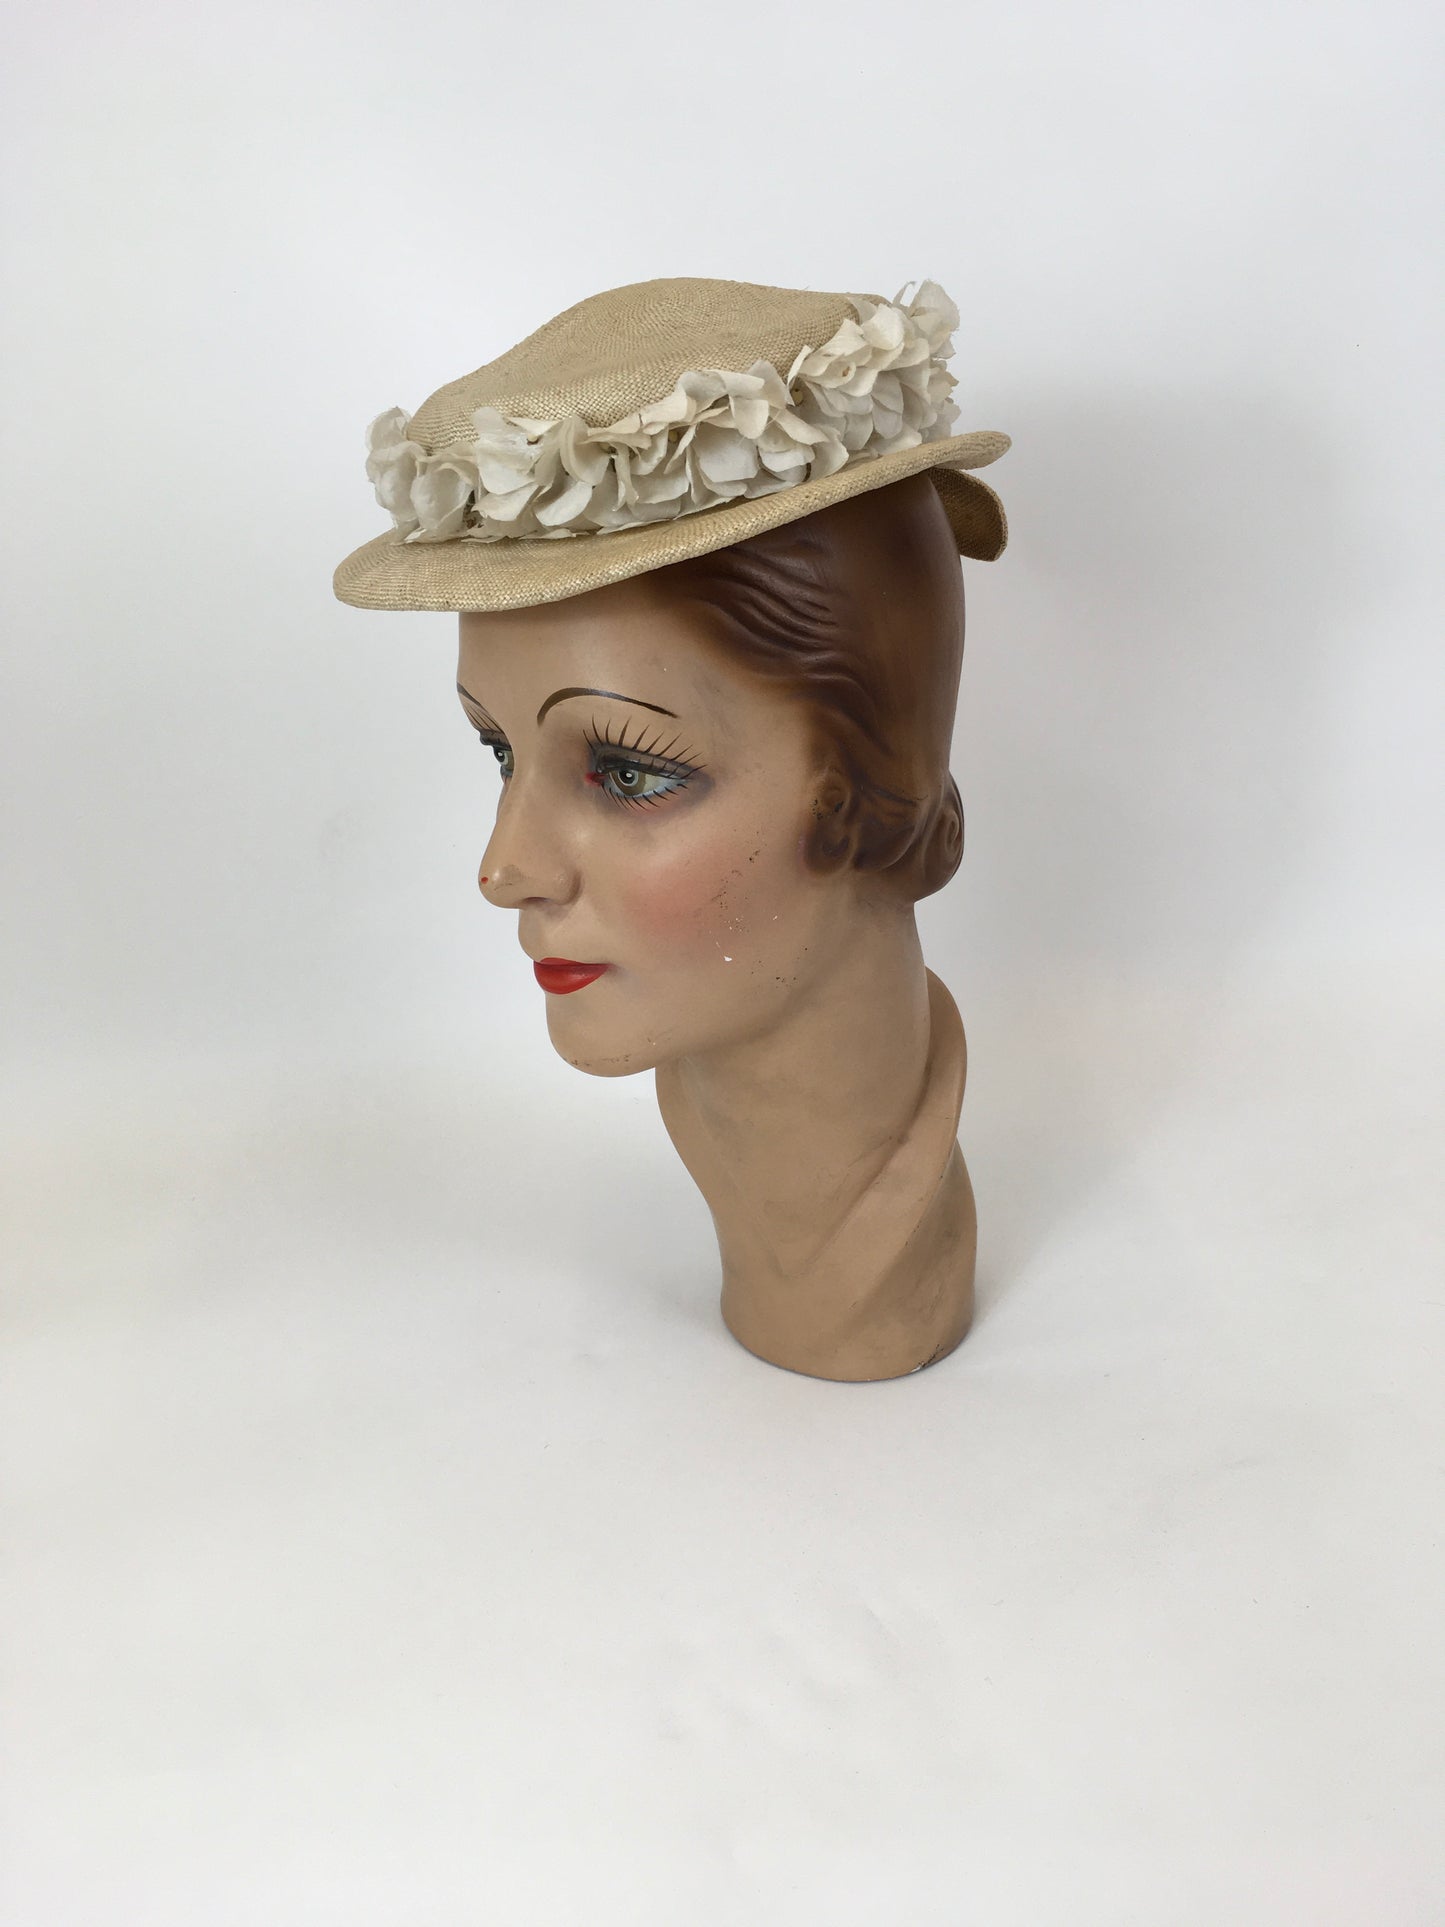 Original 1940’s Stunning Natural Straw Hat with Millinery Flora - Quirky Backplate Design